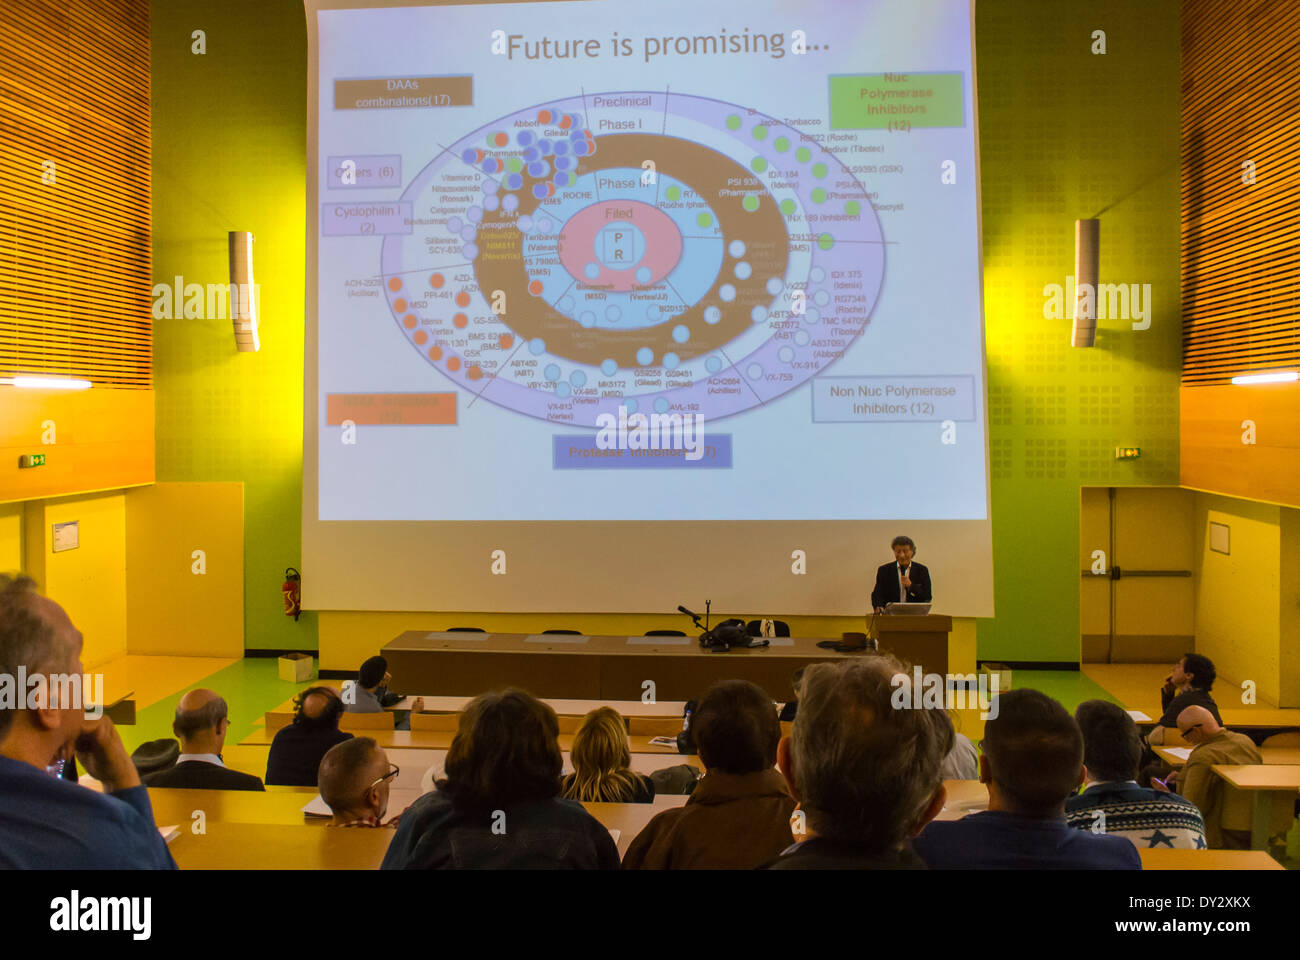 Paris, France, Local AIDS Organization, COREVIH, Annual Scientific information Meeting, CROI. Hepatitis C Research Doctor Willy Rozenbaum, Slide 'Future is Promising' scientists sharing, science conference presentation, epidemiology Stock Photo